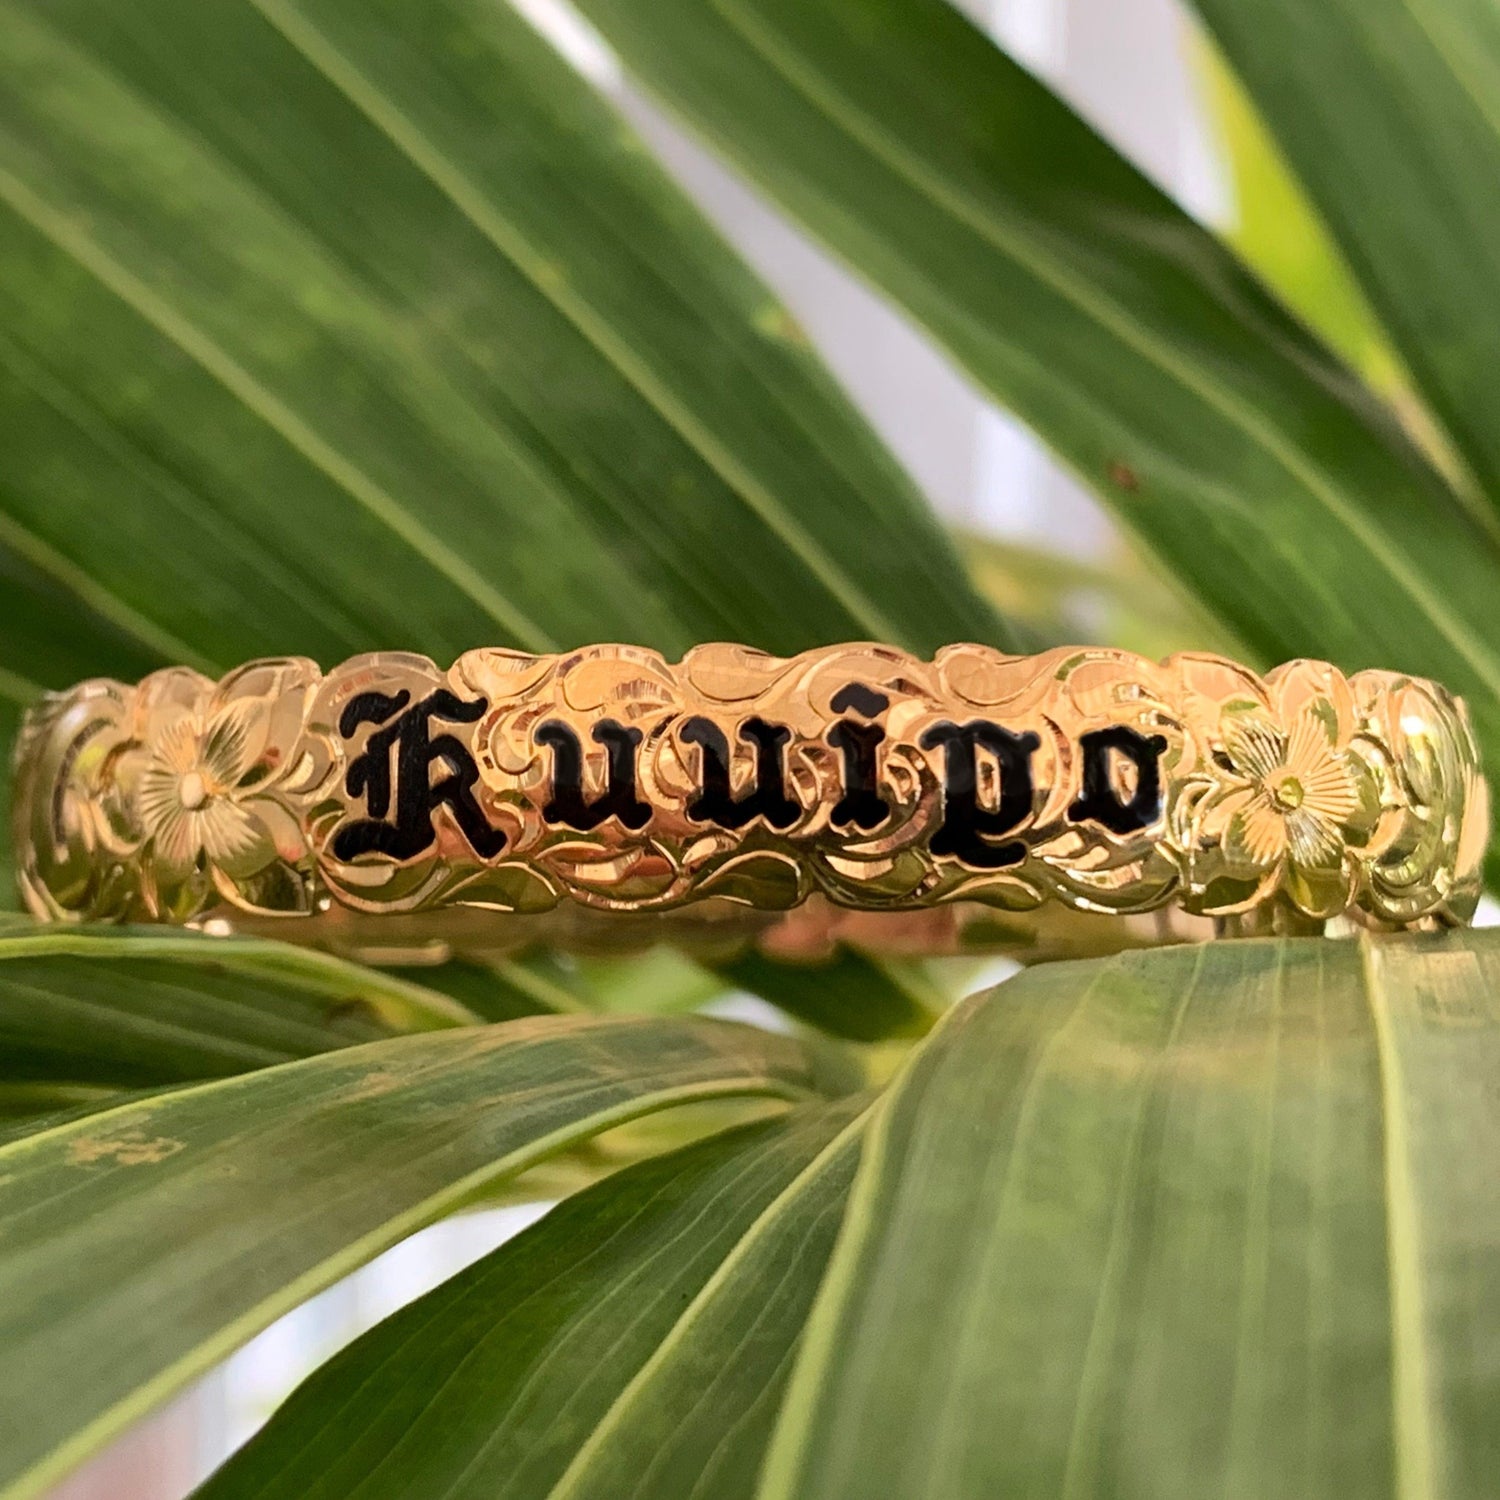 Baby Hawaiian heirloom bracelet with scroll edge and black lettering.